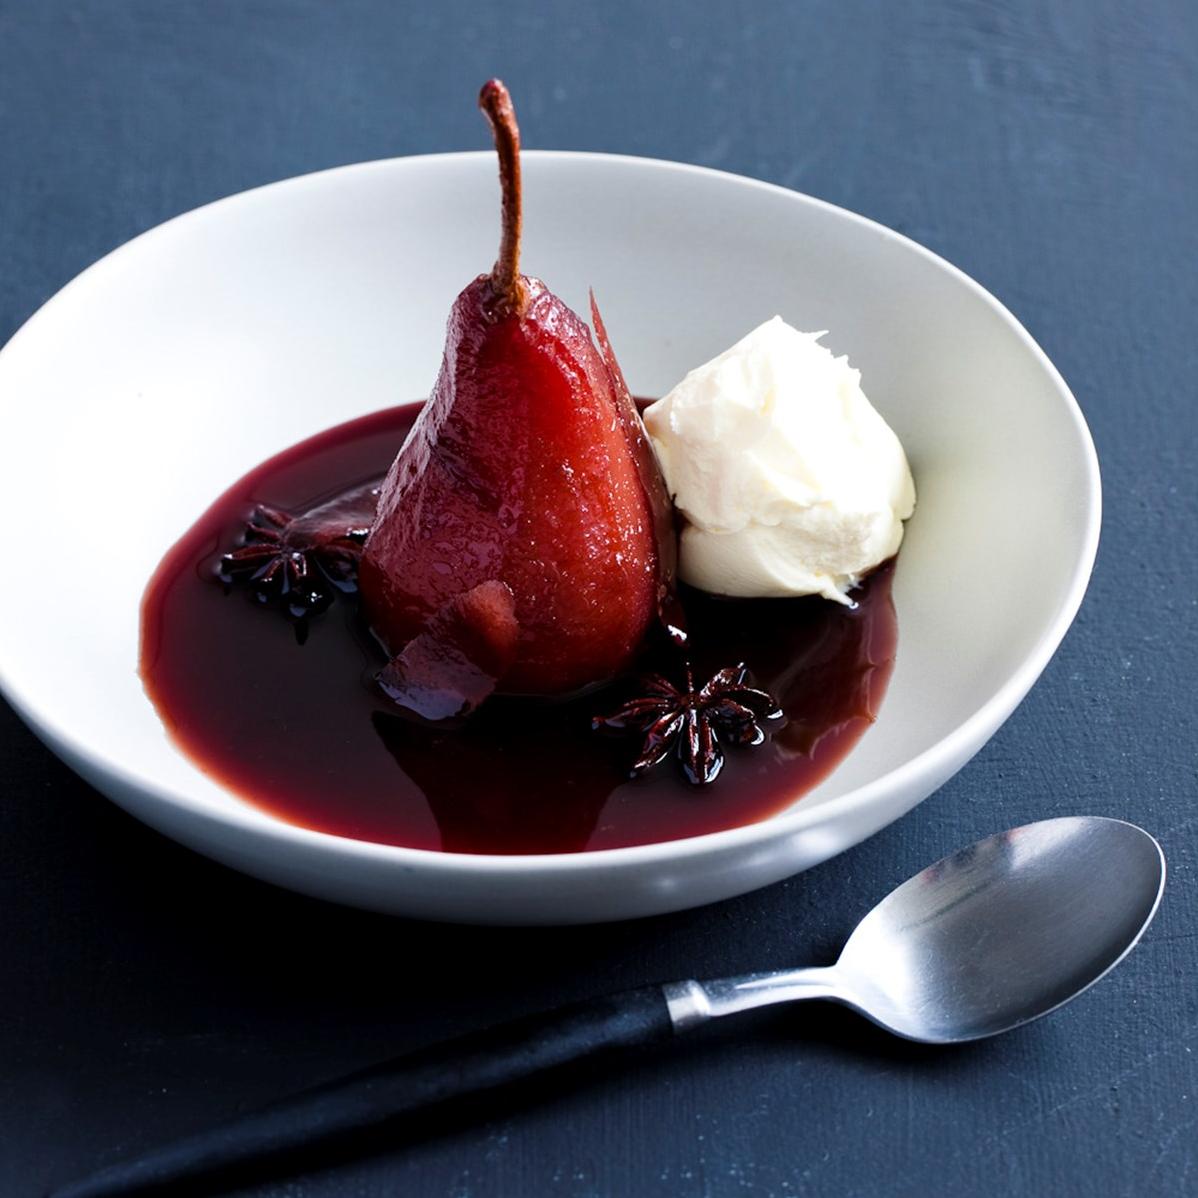  Juicy pears cooked in decadent red wine sauce